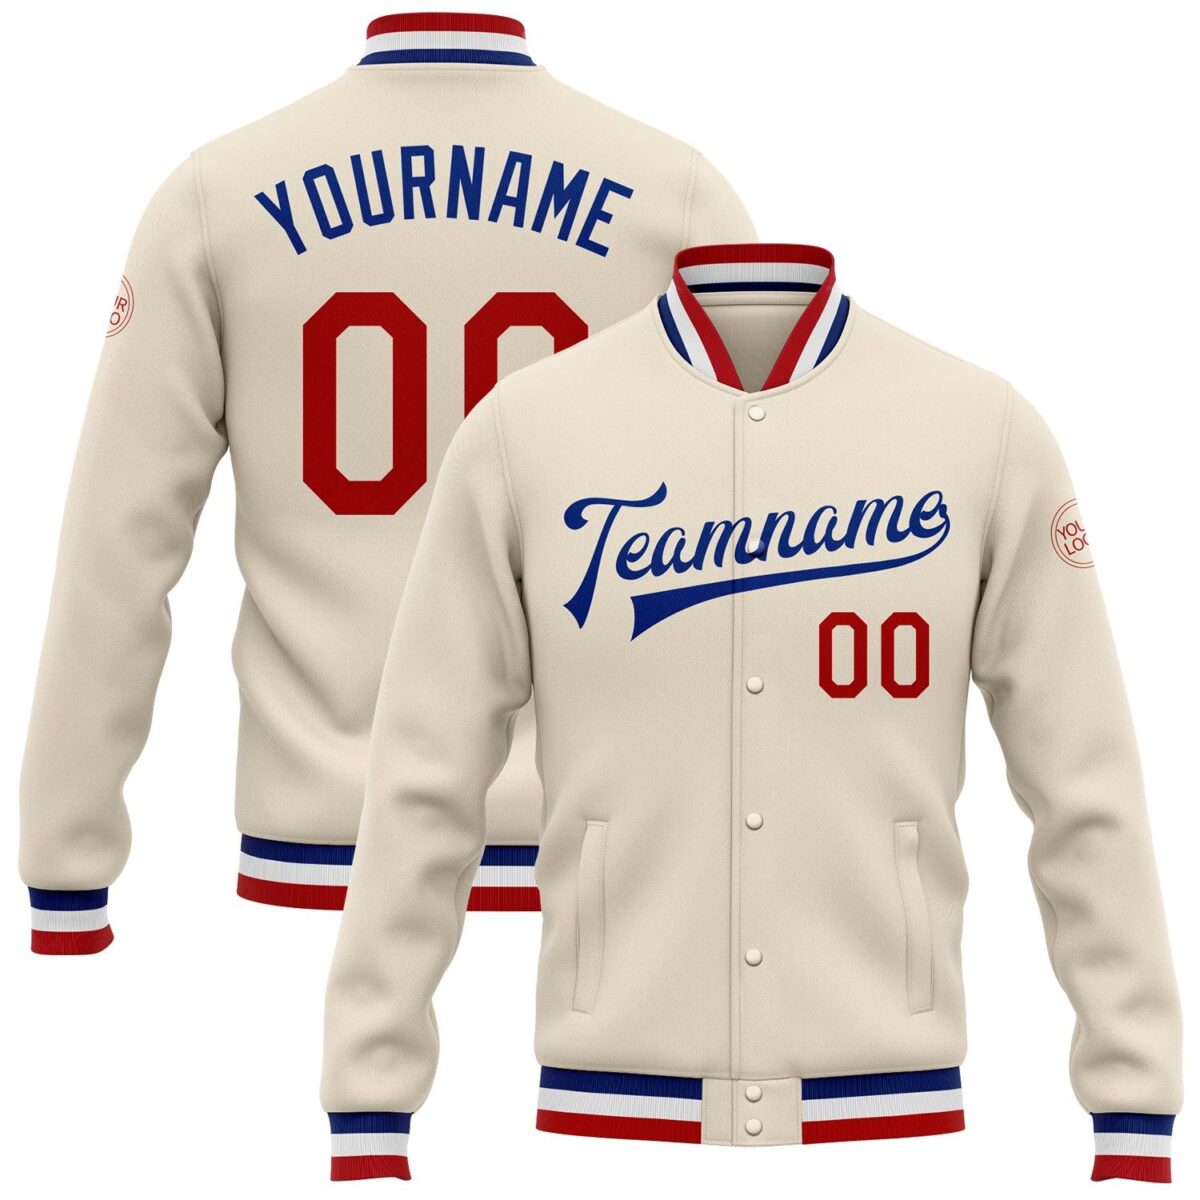 College Baseball Student Jacket with Cream 1